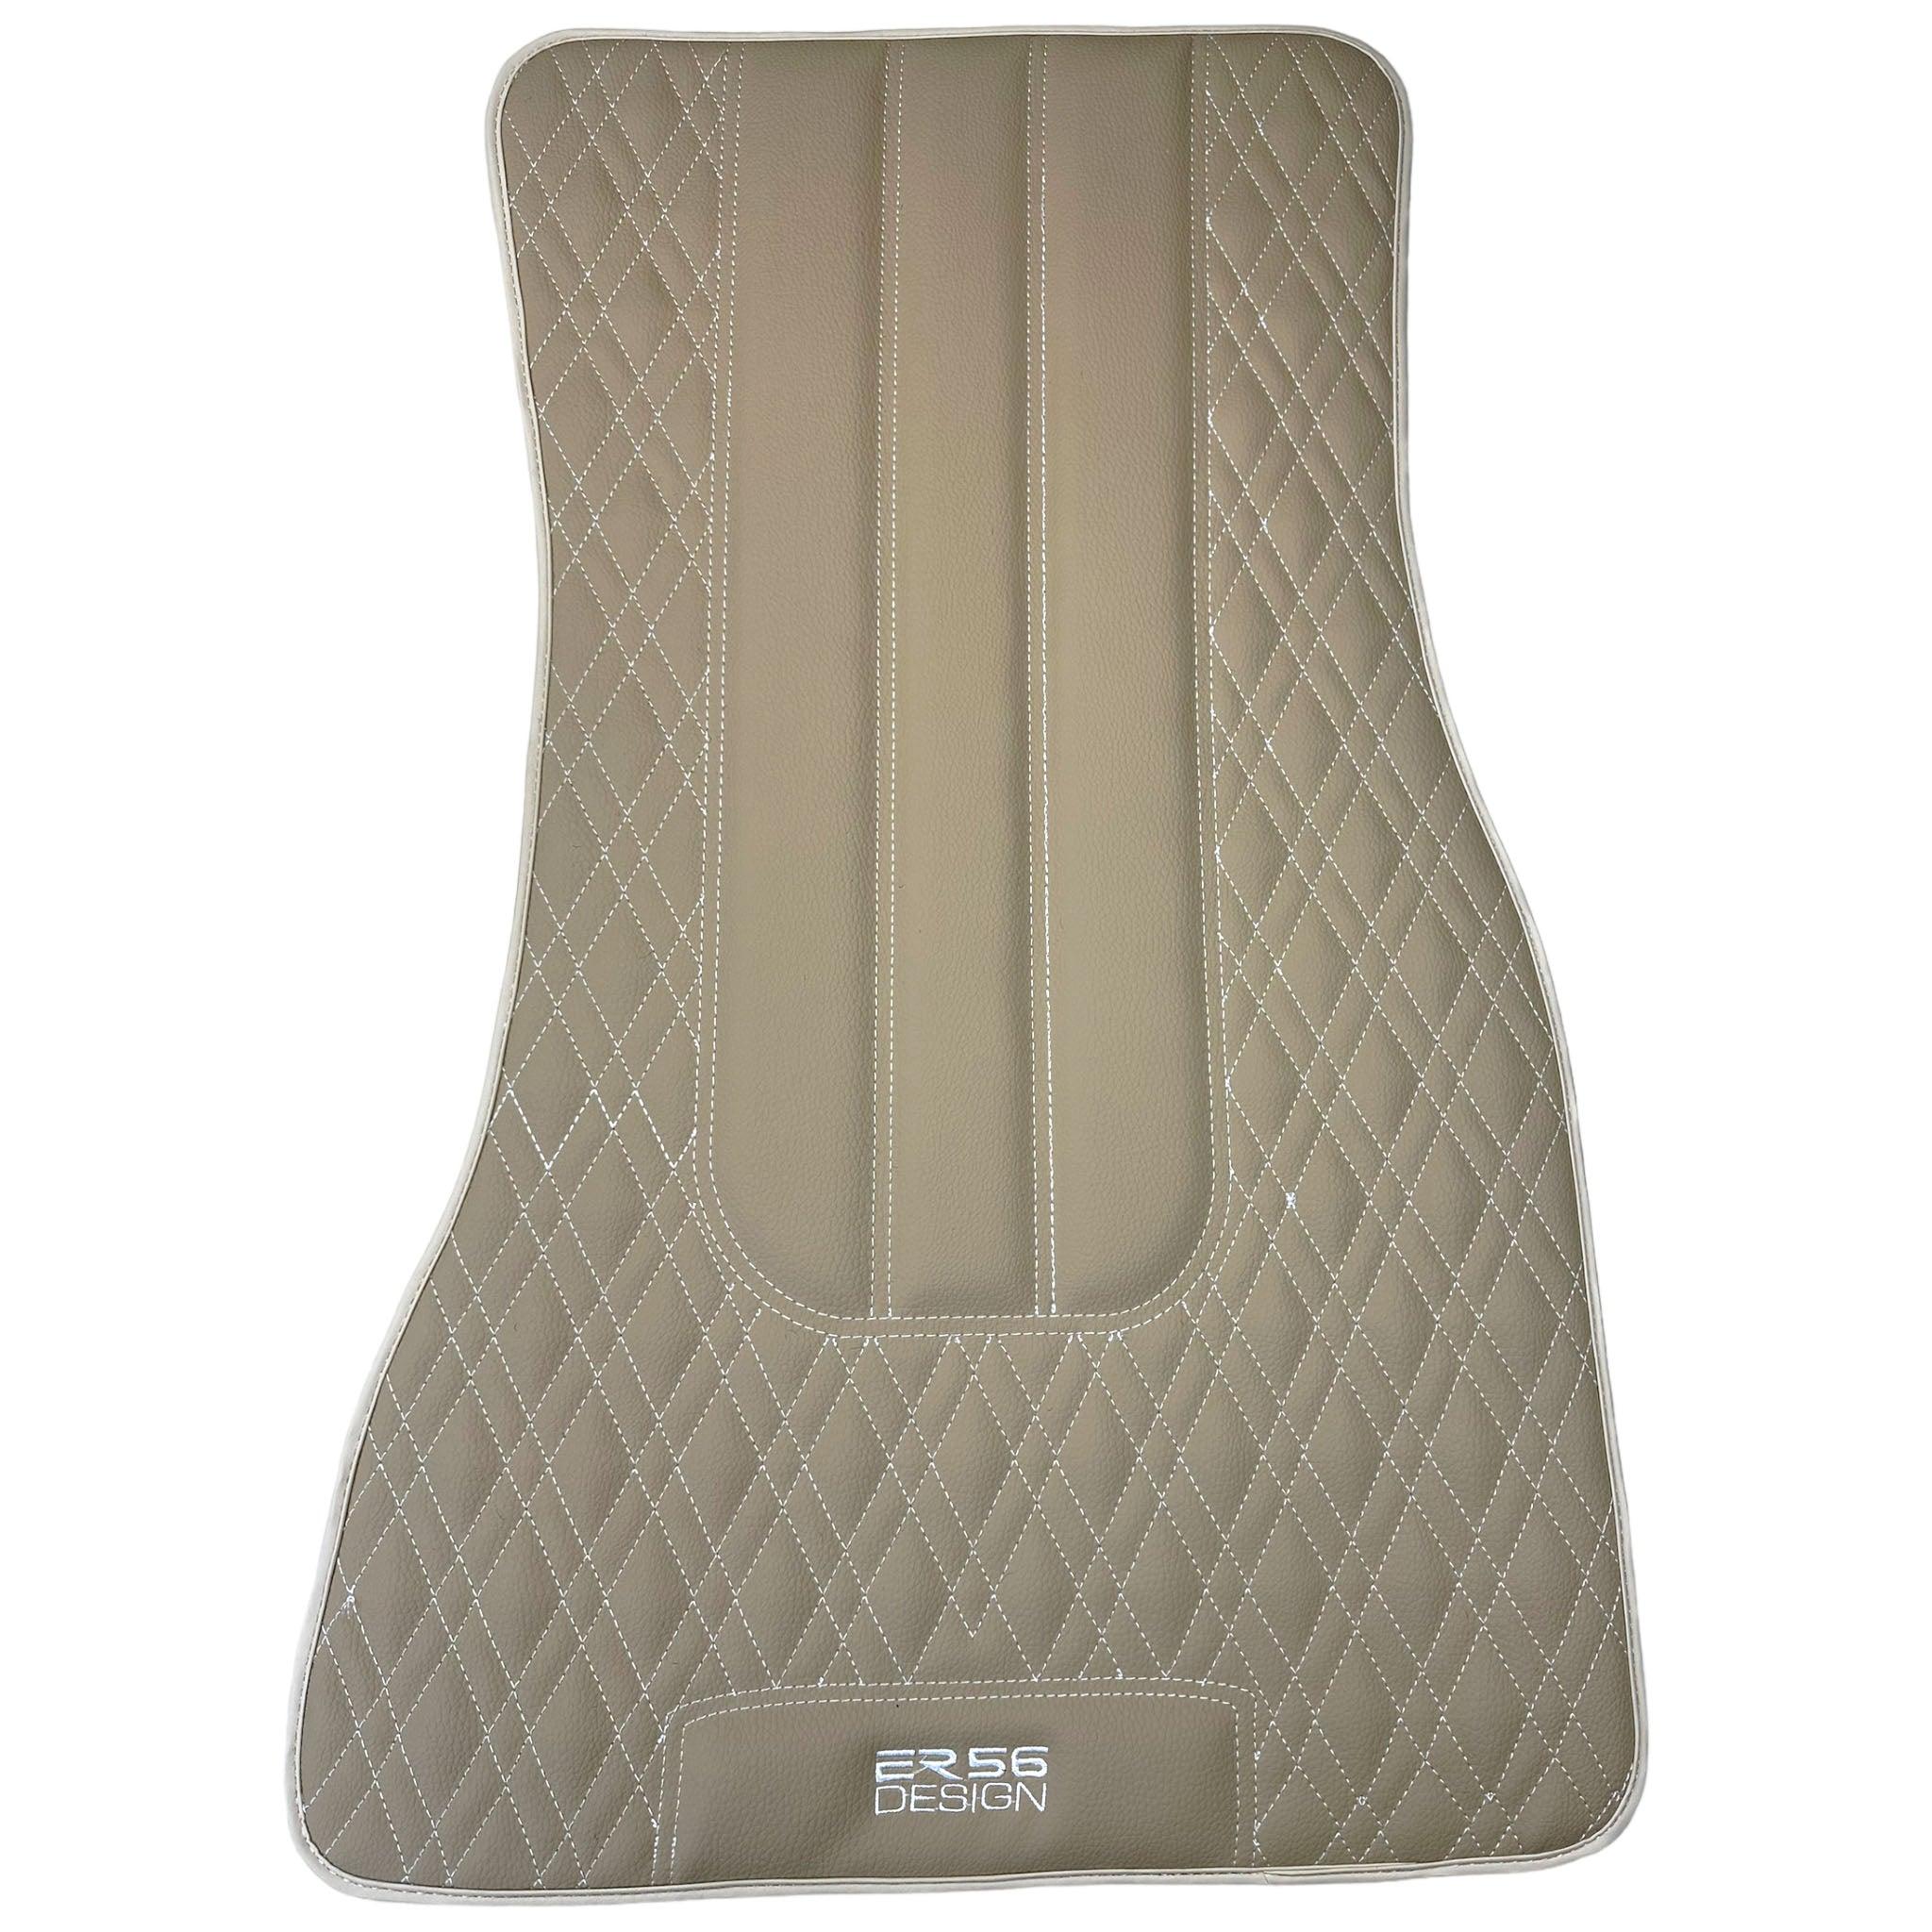 Beige Leather Floor Mats For BMW X3 - E83 SUV